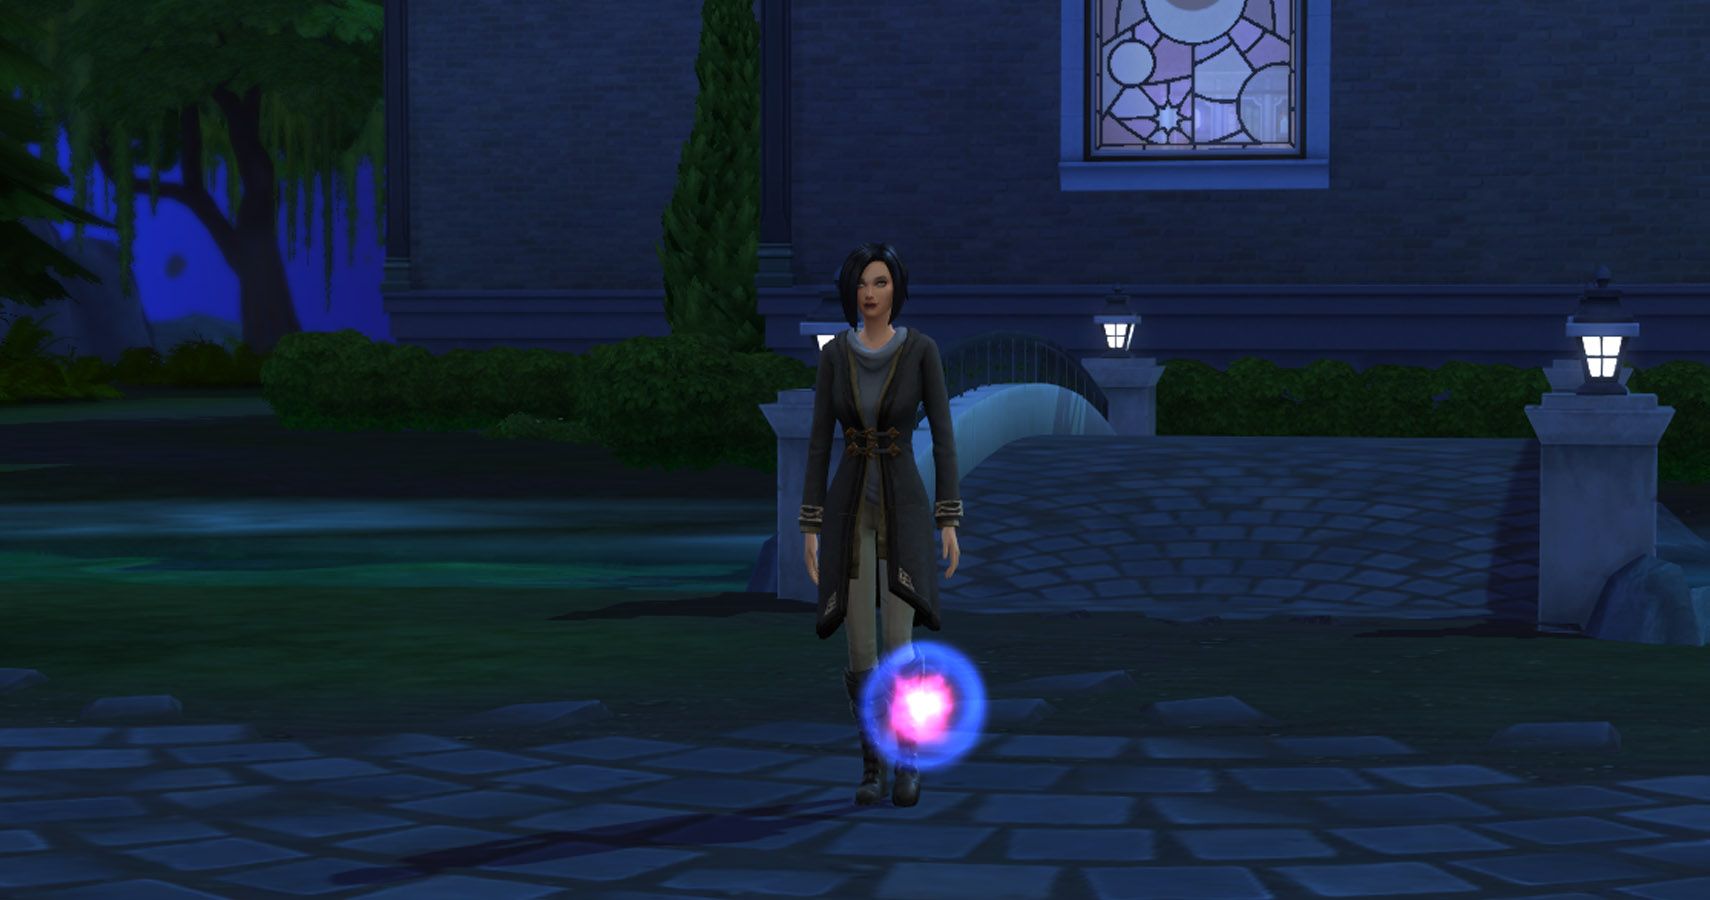 Making Magic How To Get Started As A Spellcaster in The Sims 4 Realm Of Magic